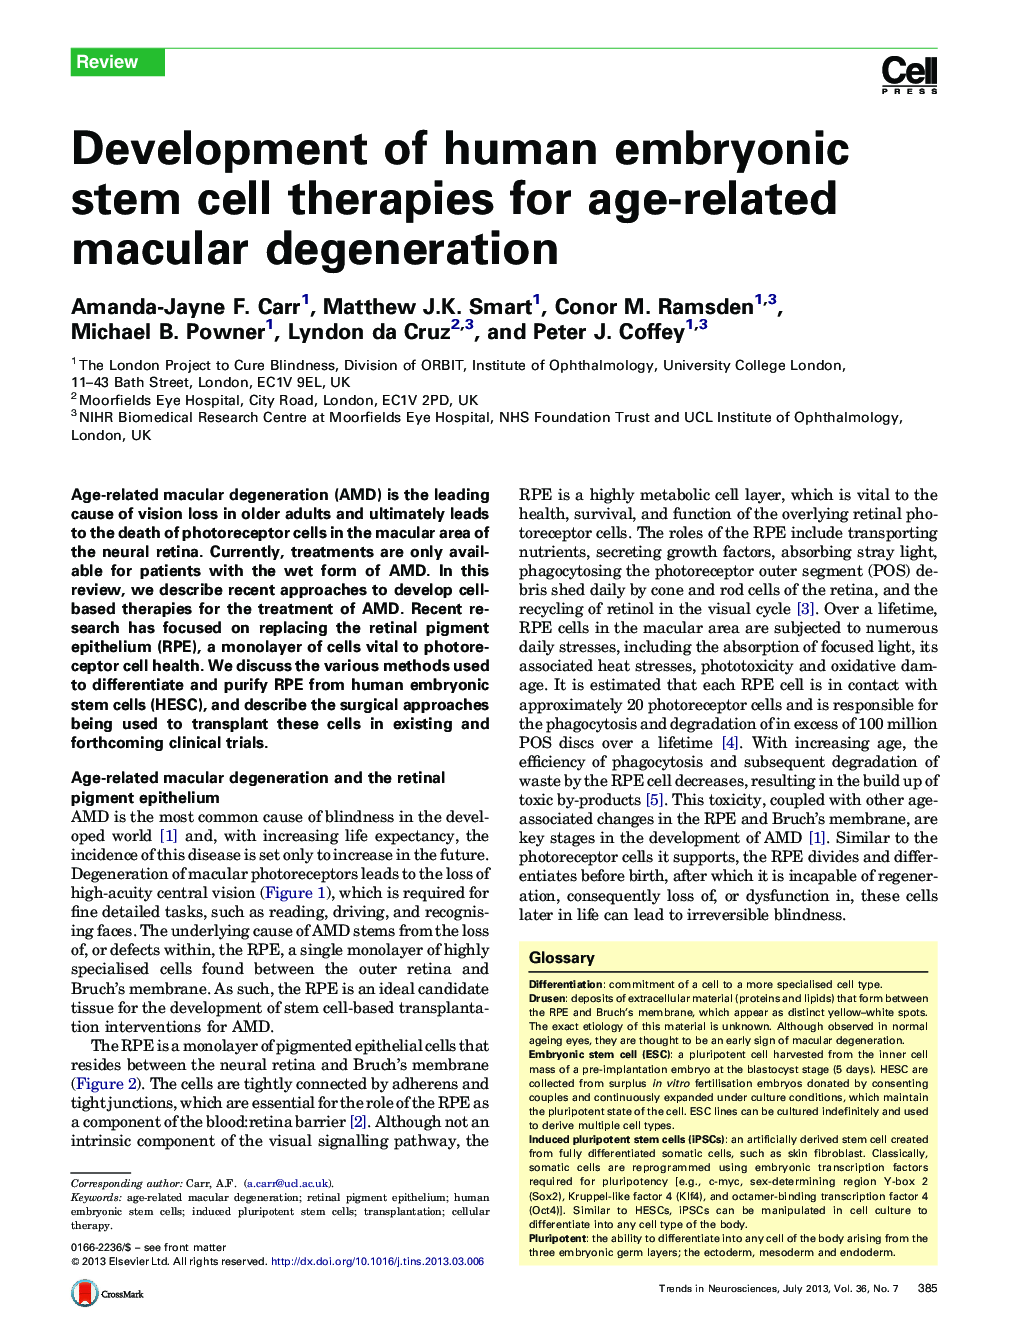 Development of human embryonic stem cell therapies for age-related macular degeneration